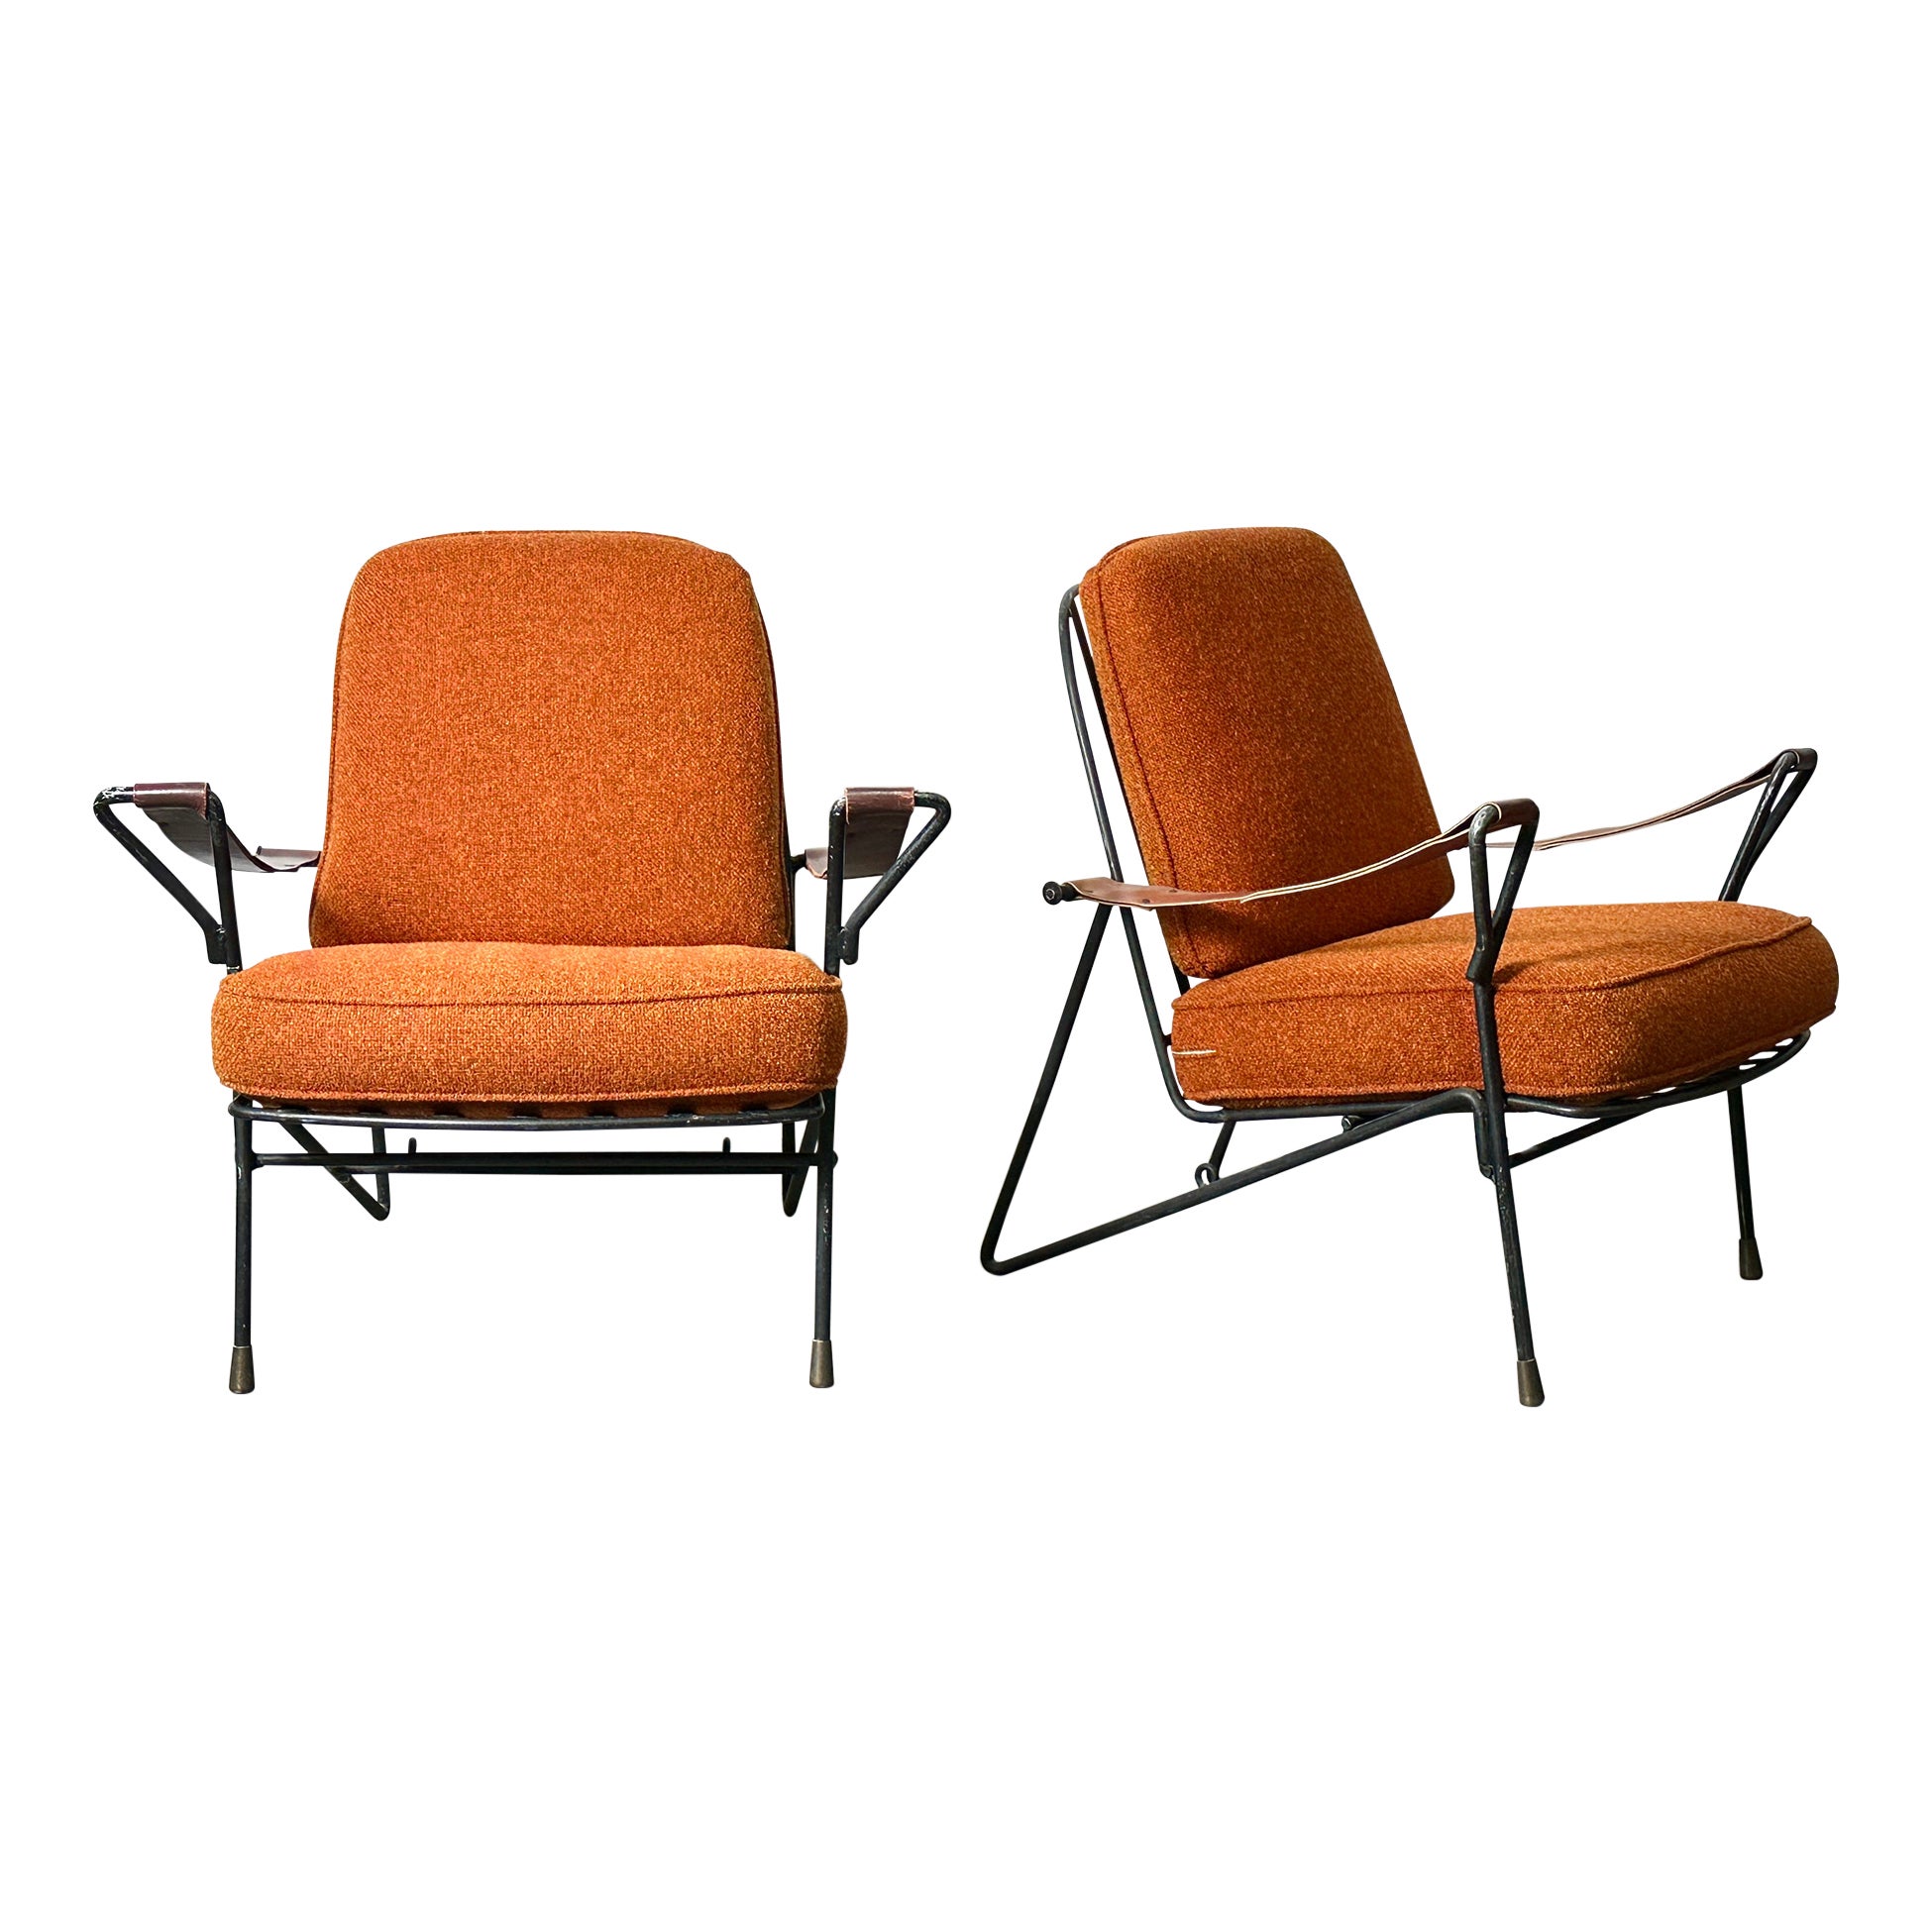 A Pair of Vintage Mid Century Mexican Modern Iron Leather Lounge Chairs 1950s